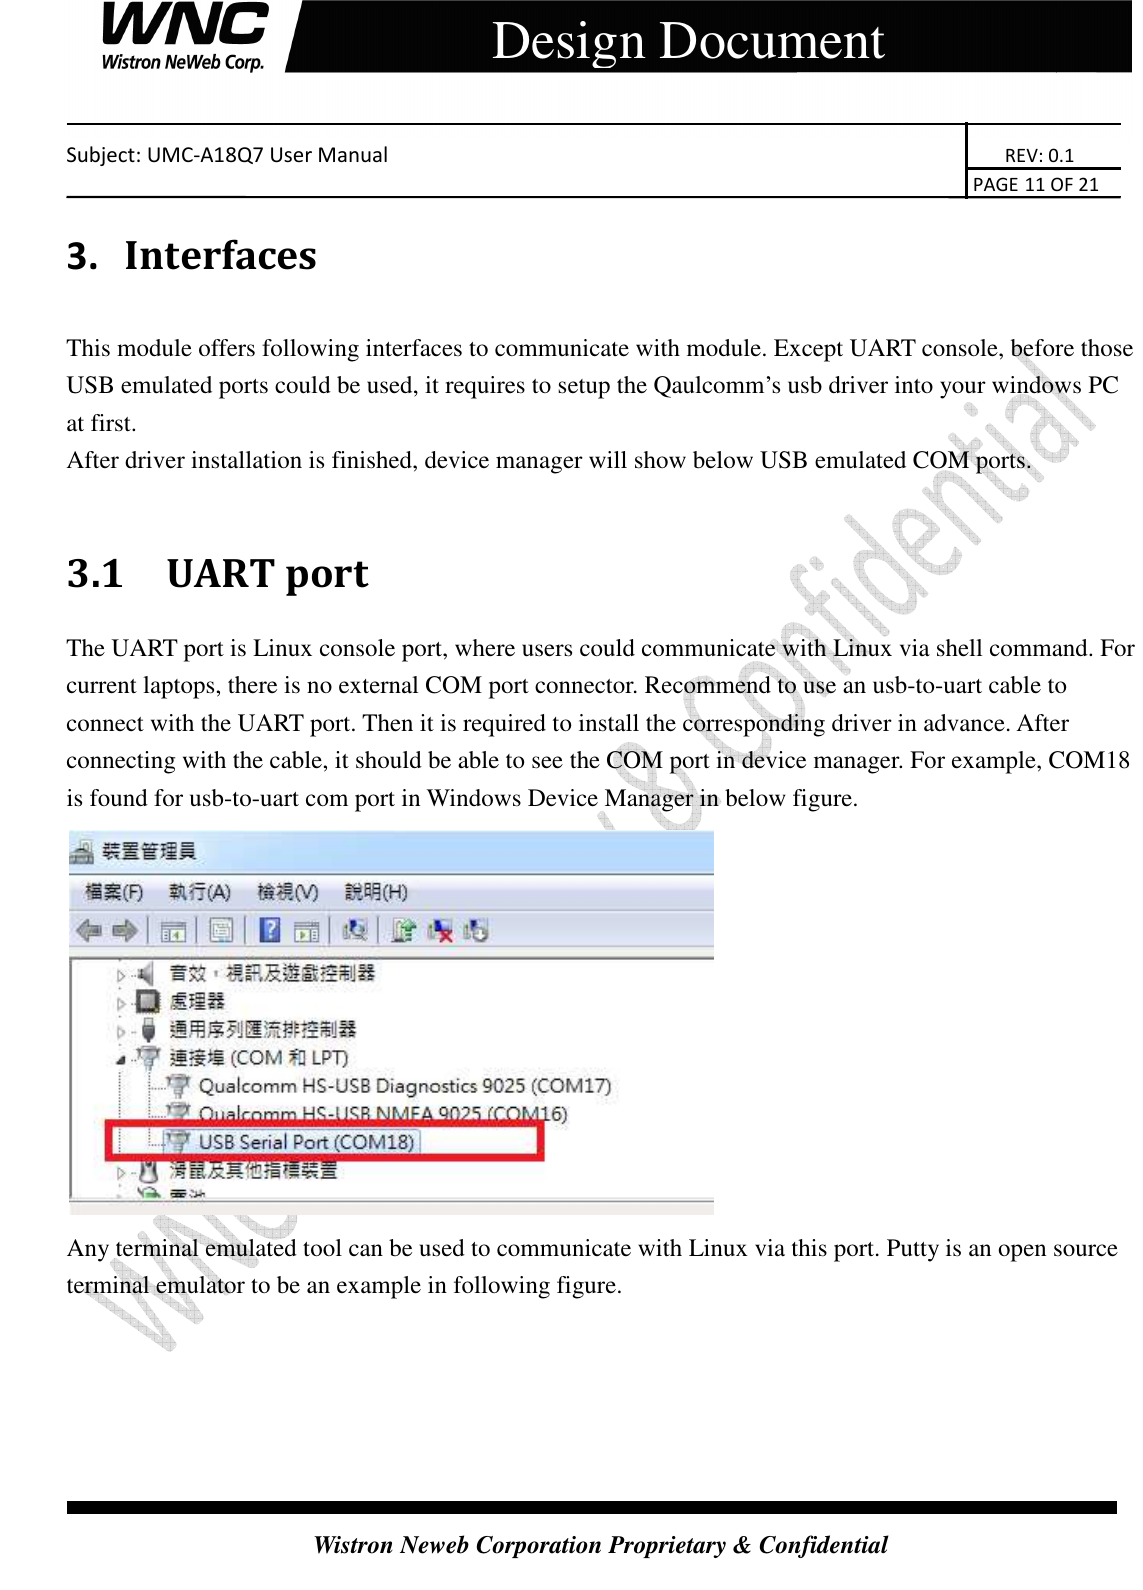    Subject: UMC-A18Q7 User Manual                                                                       REV: 0.1                                                                                                                                                                               PAGE 11 OF 21  Wistron Neweb Corporation Proprietary &amp; Confidential     Design Document 3.   Interfaces This module offers following interfaces to communicate with module. Except UART console, before those USB emulated ports could be used, it requires to setup the Qaulcomm’s usb driver into your windows PC at first. After driver installation is finished, device manager will show below USB emulated COM ports.  3.1 UART port The UART port is Linux console port, where users could communicate with Linux via shell command. For current laptops, there is no external COM port connector. Recommend to use an usb-to-uart cable to connect with the UART port. Then it is required to install the corresponding driver in advance. After connecting with the cable, it should be able to see the COM port in device manager. For example, COM18 is found for usb-to-uart com port in Windows Device Manager in below figure.  Any terminal emulated tool can be used to communicate with Linux via this port. Putty is an open source terminal emulator to be an example in following figure.   